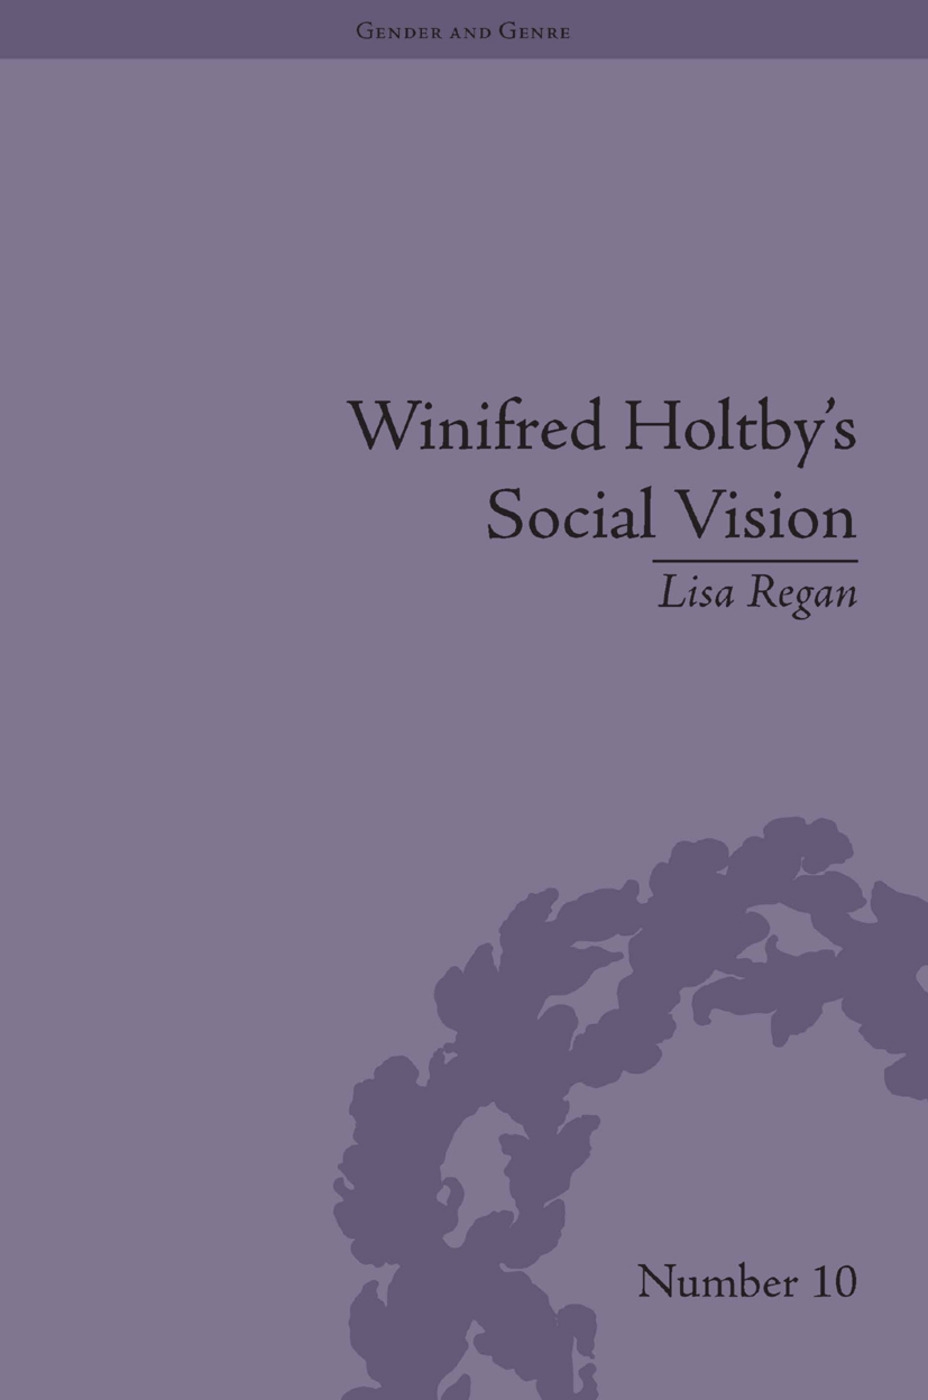 Winifred Holtby’s Social Vision: ’members One of Another’